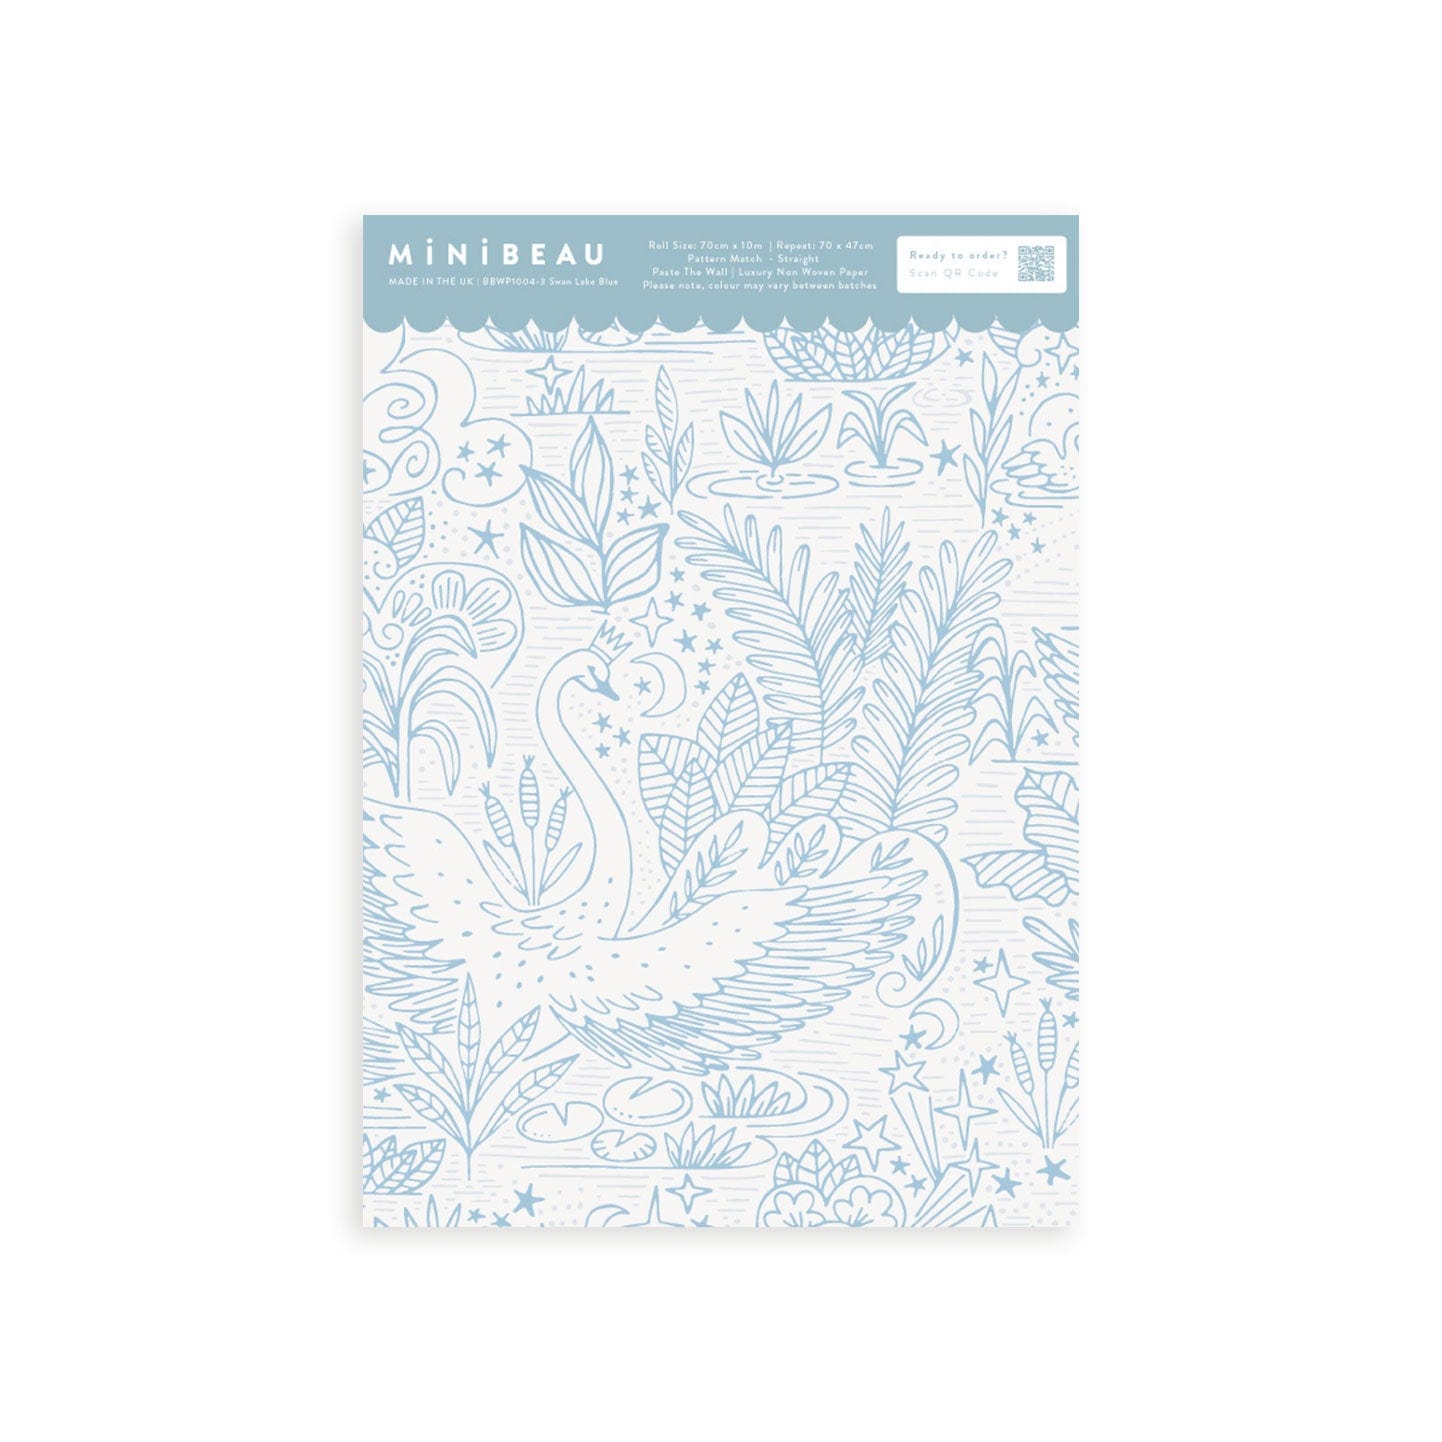 Wallpaper sample of very detailed floral print with swans gliding across a lake, flowers and leaves surround them. The print is line work and is all in blue